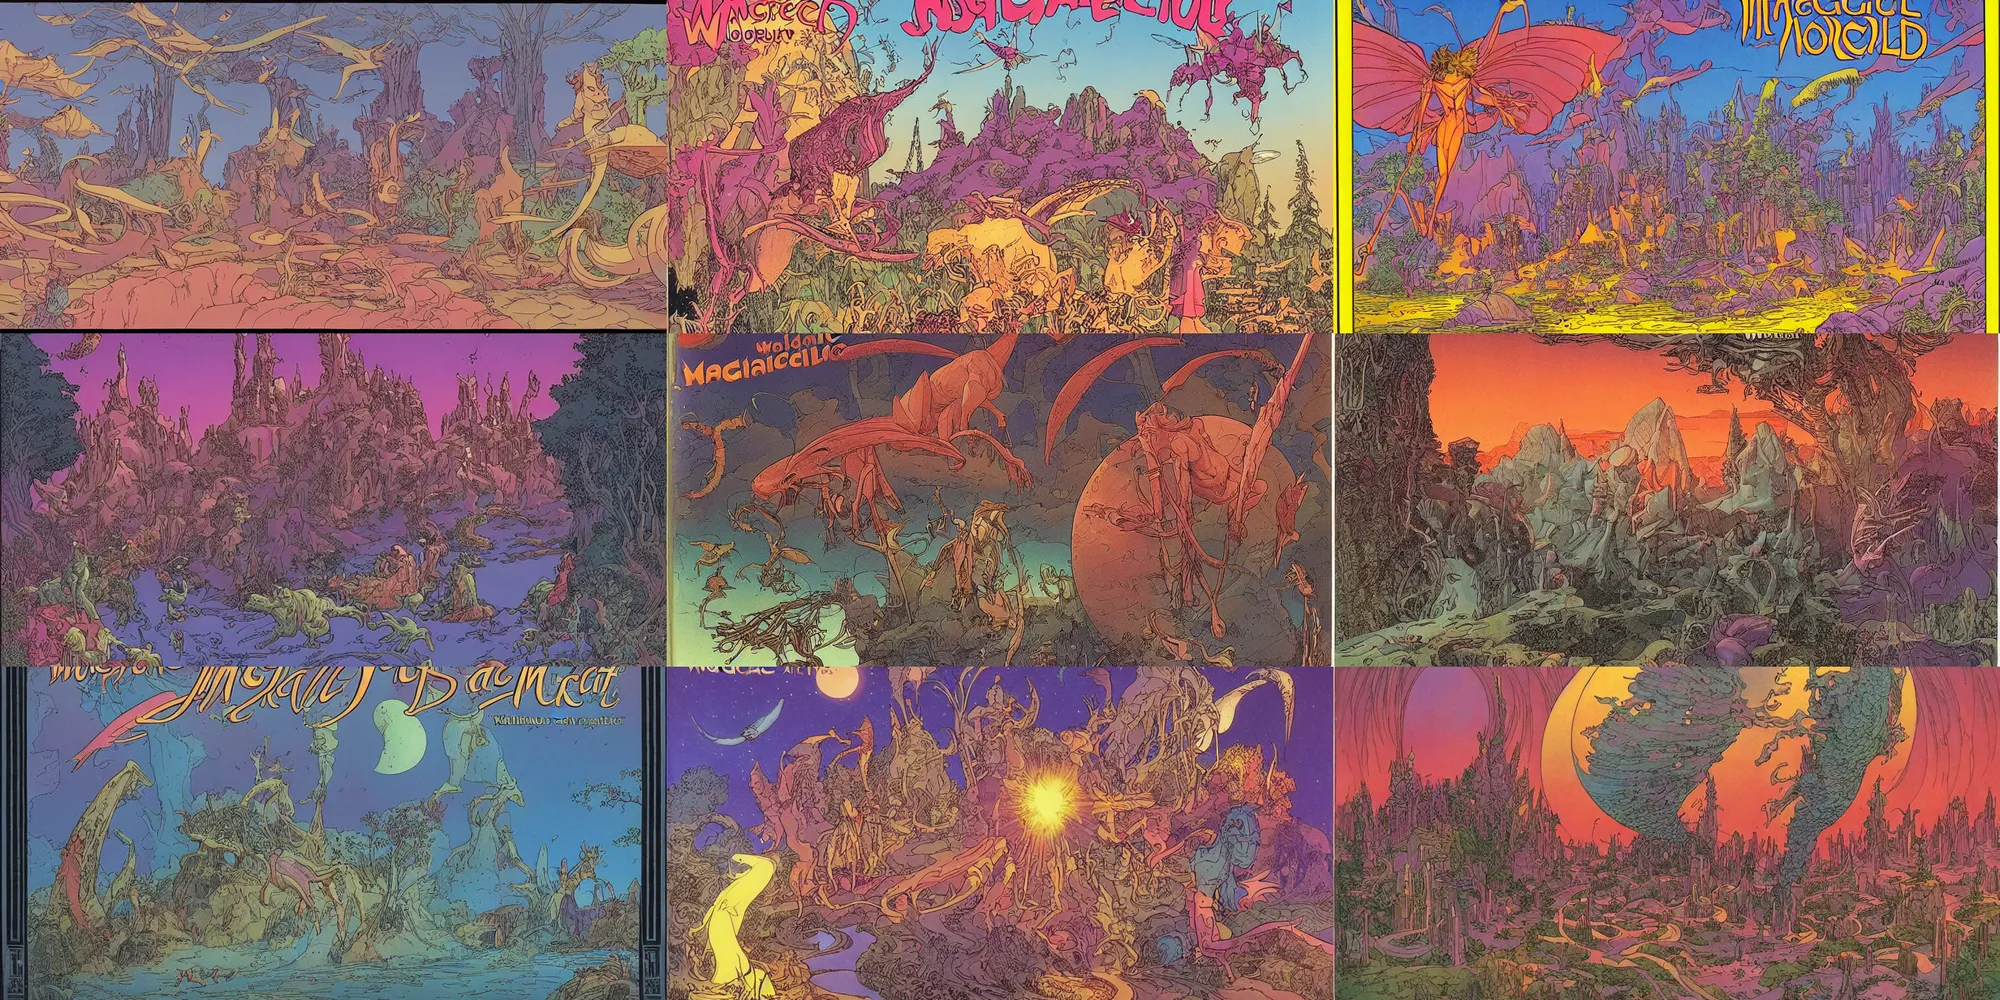 Prompt: magical world by william hart and moebius